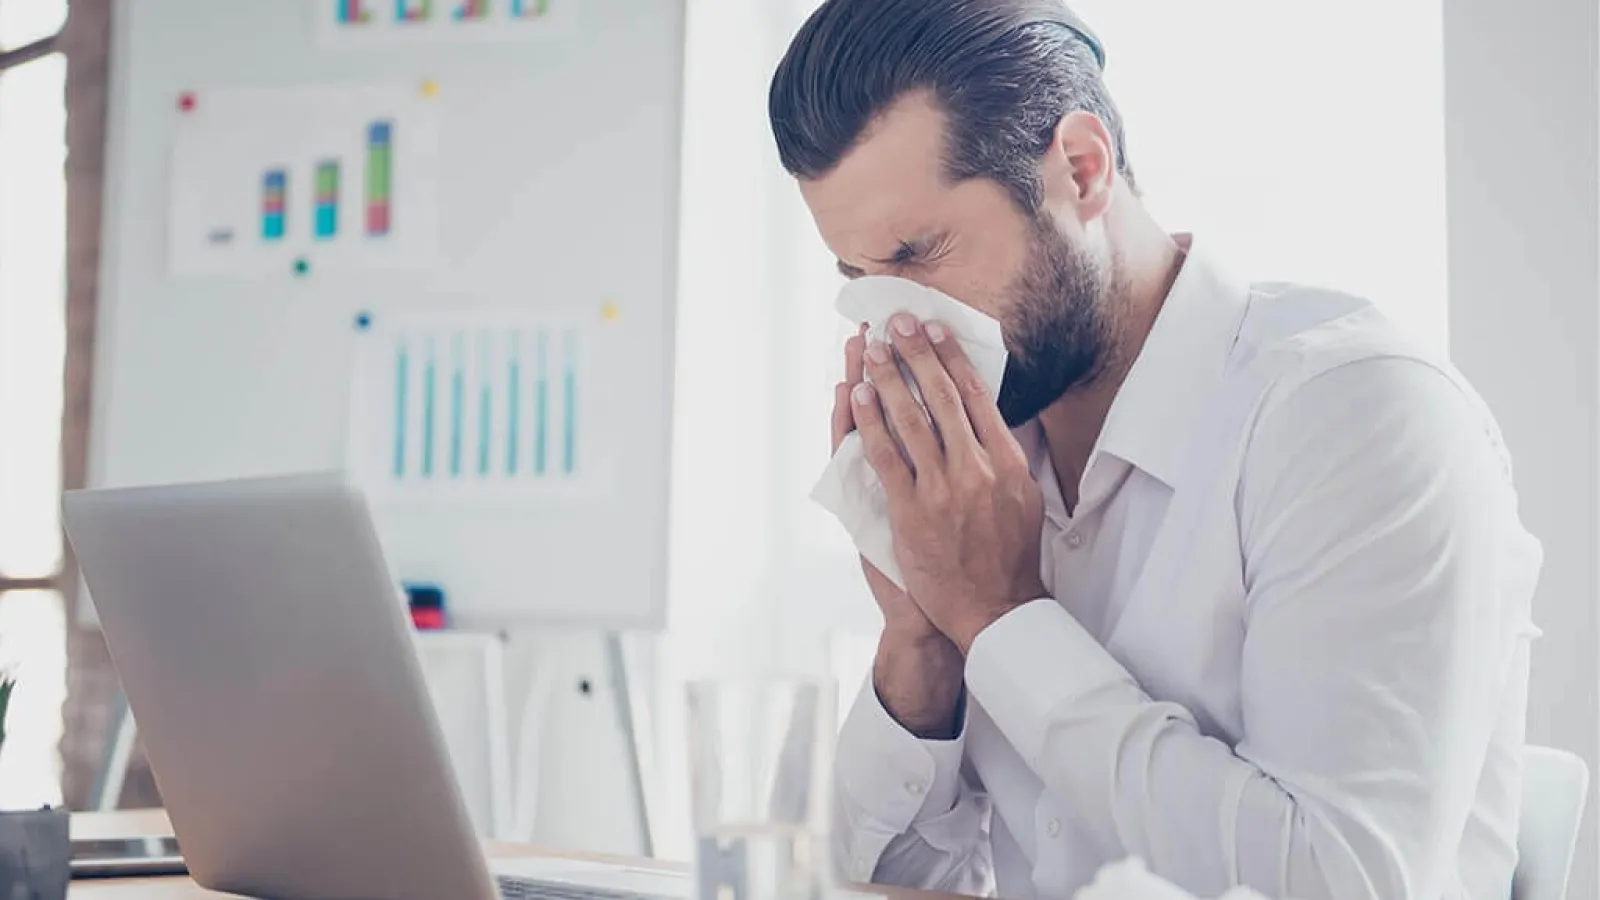 The Link Between Neglected Commercial HVAC and Allergies Means More Sick Days & Productivity Loss